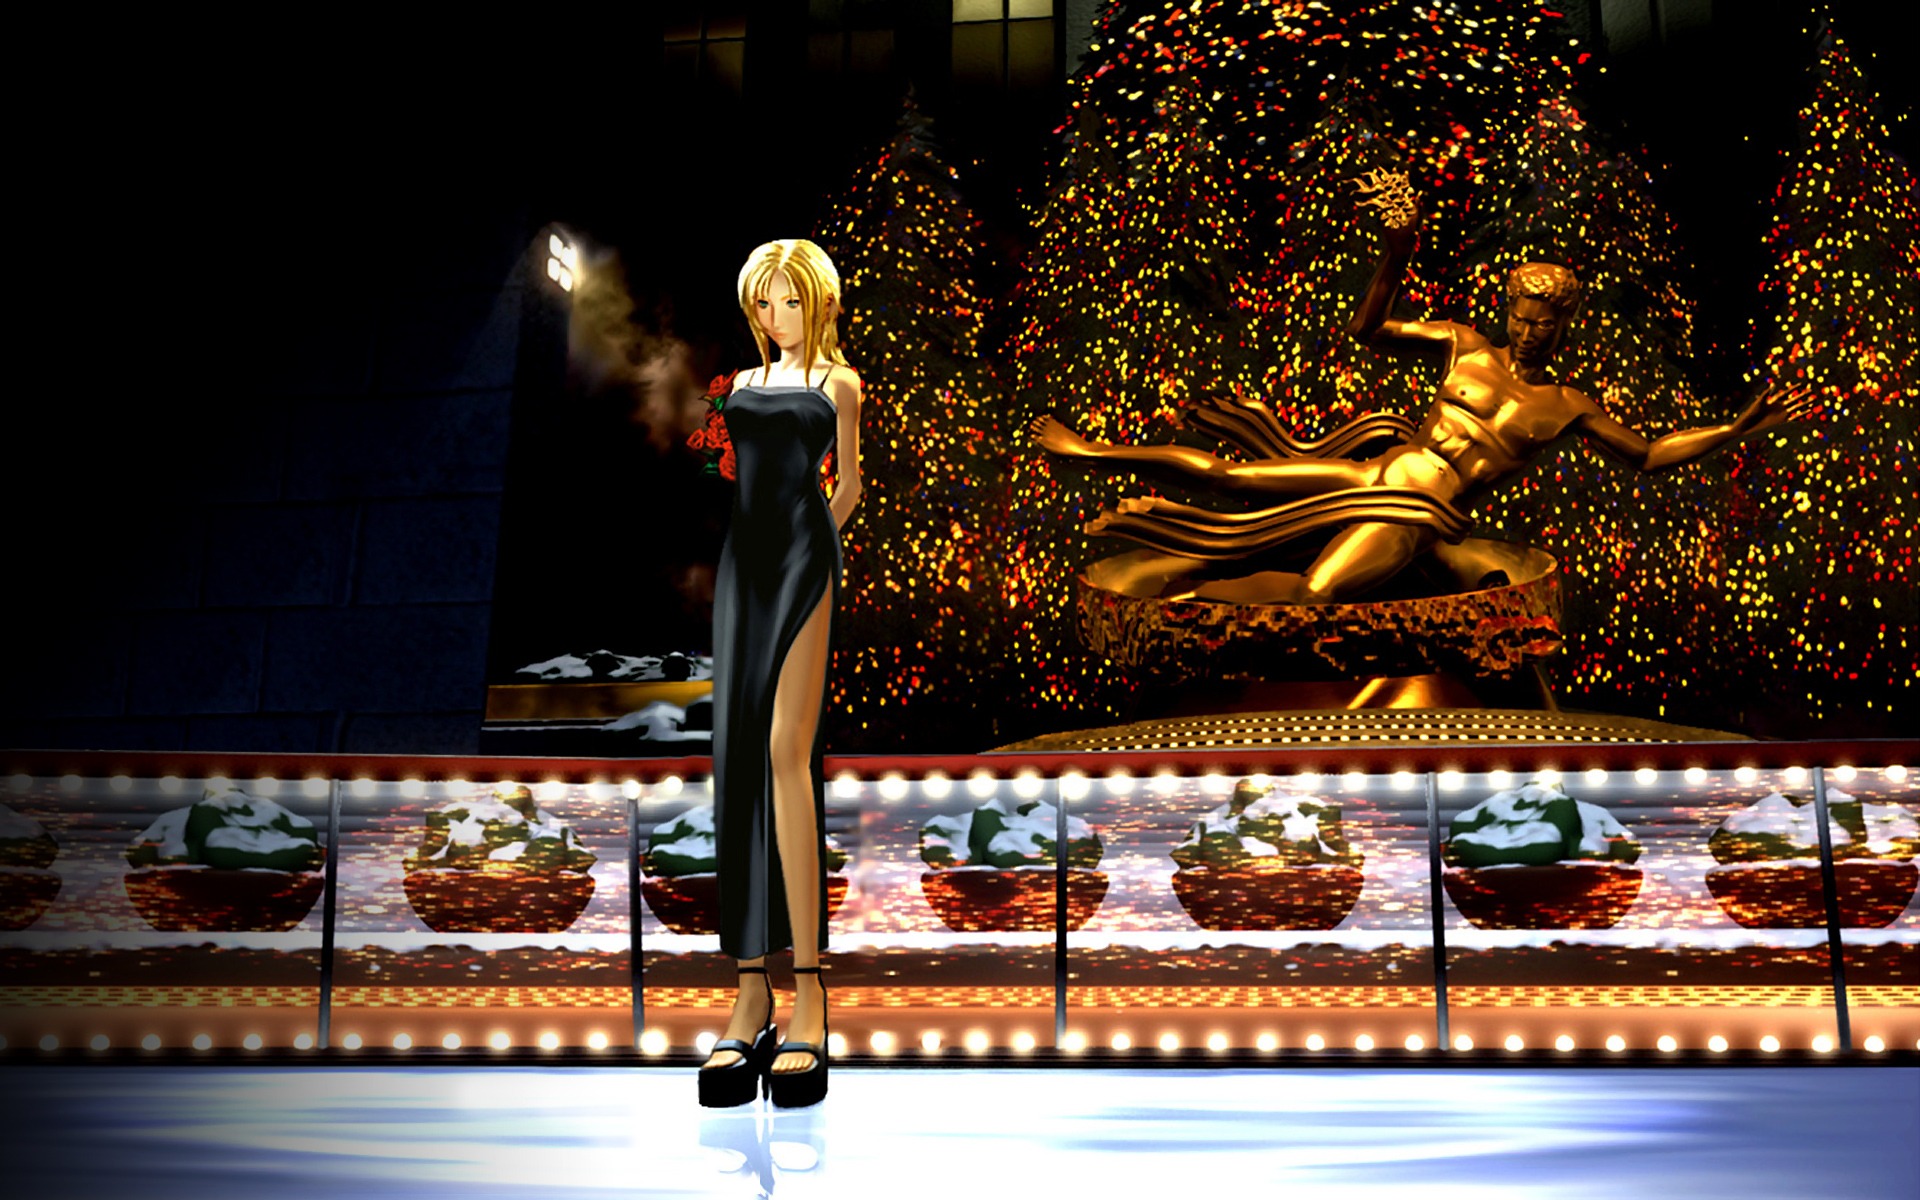 Video Game Parasite Eve HD Wallpaper | Background Image